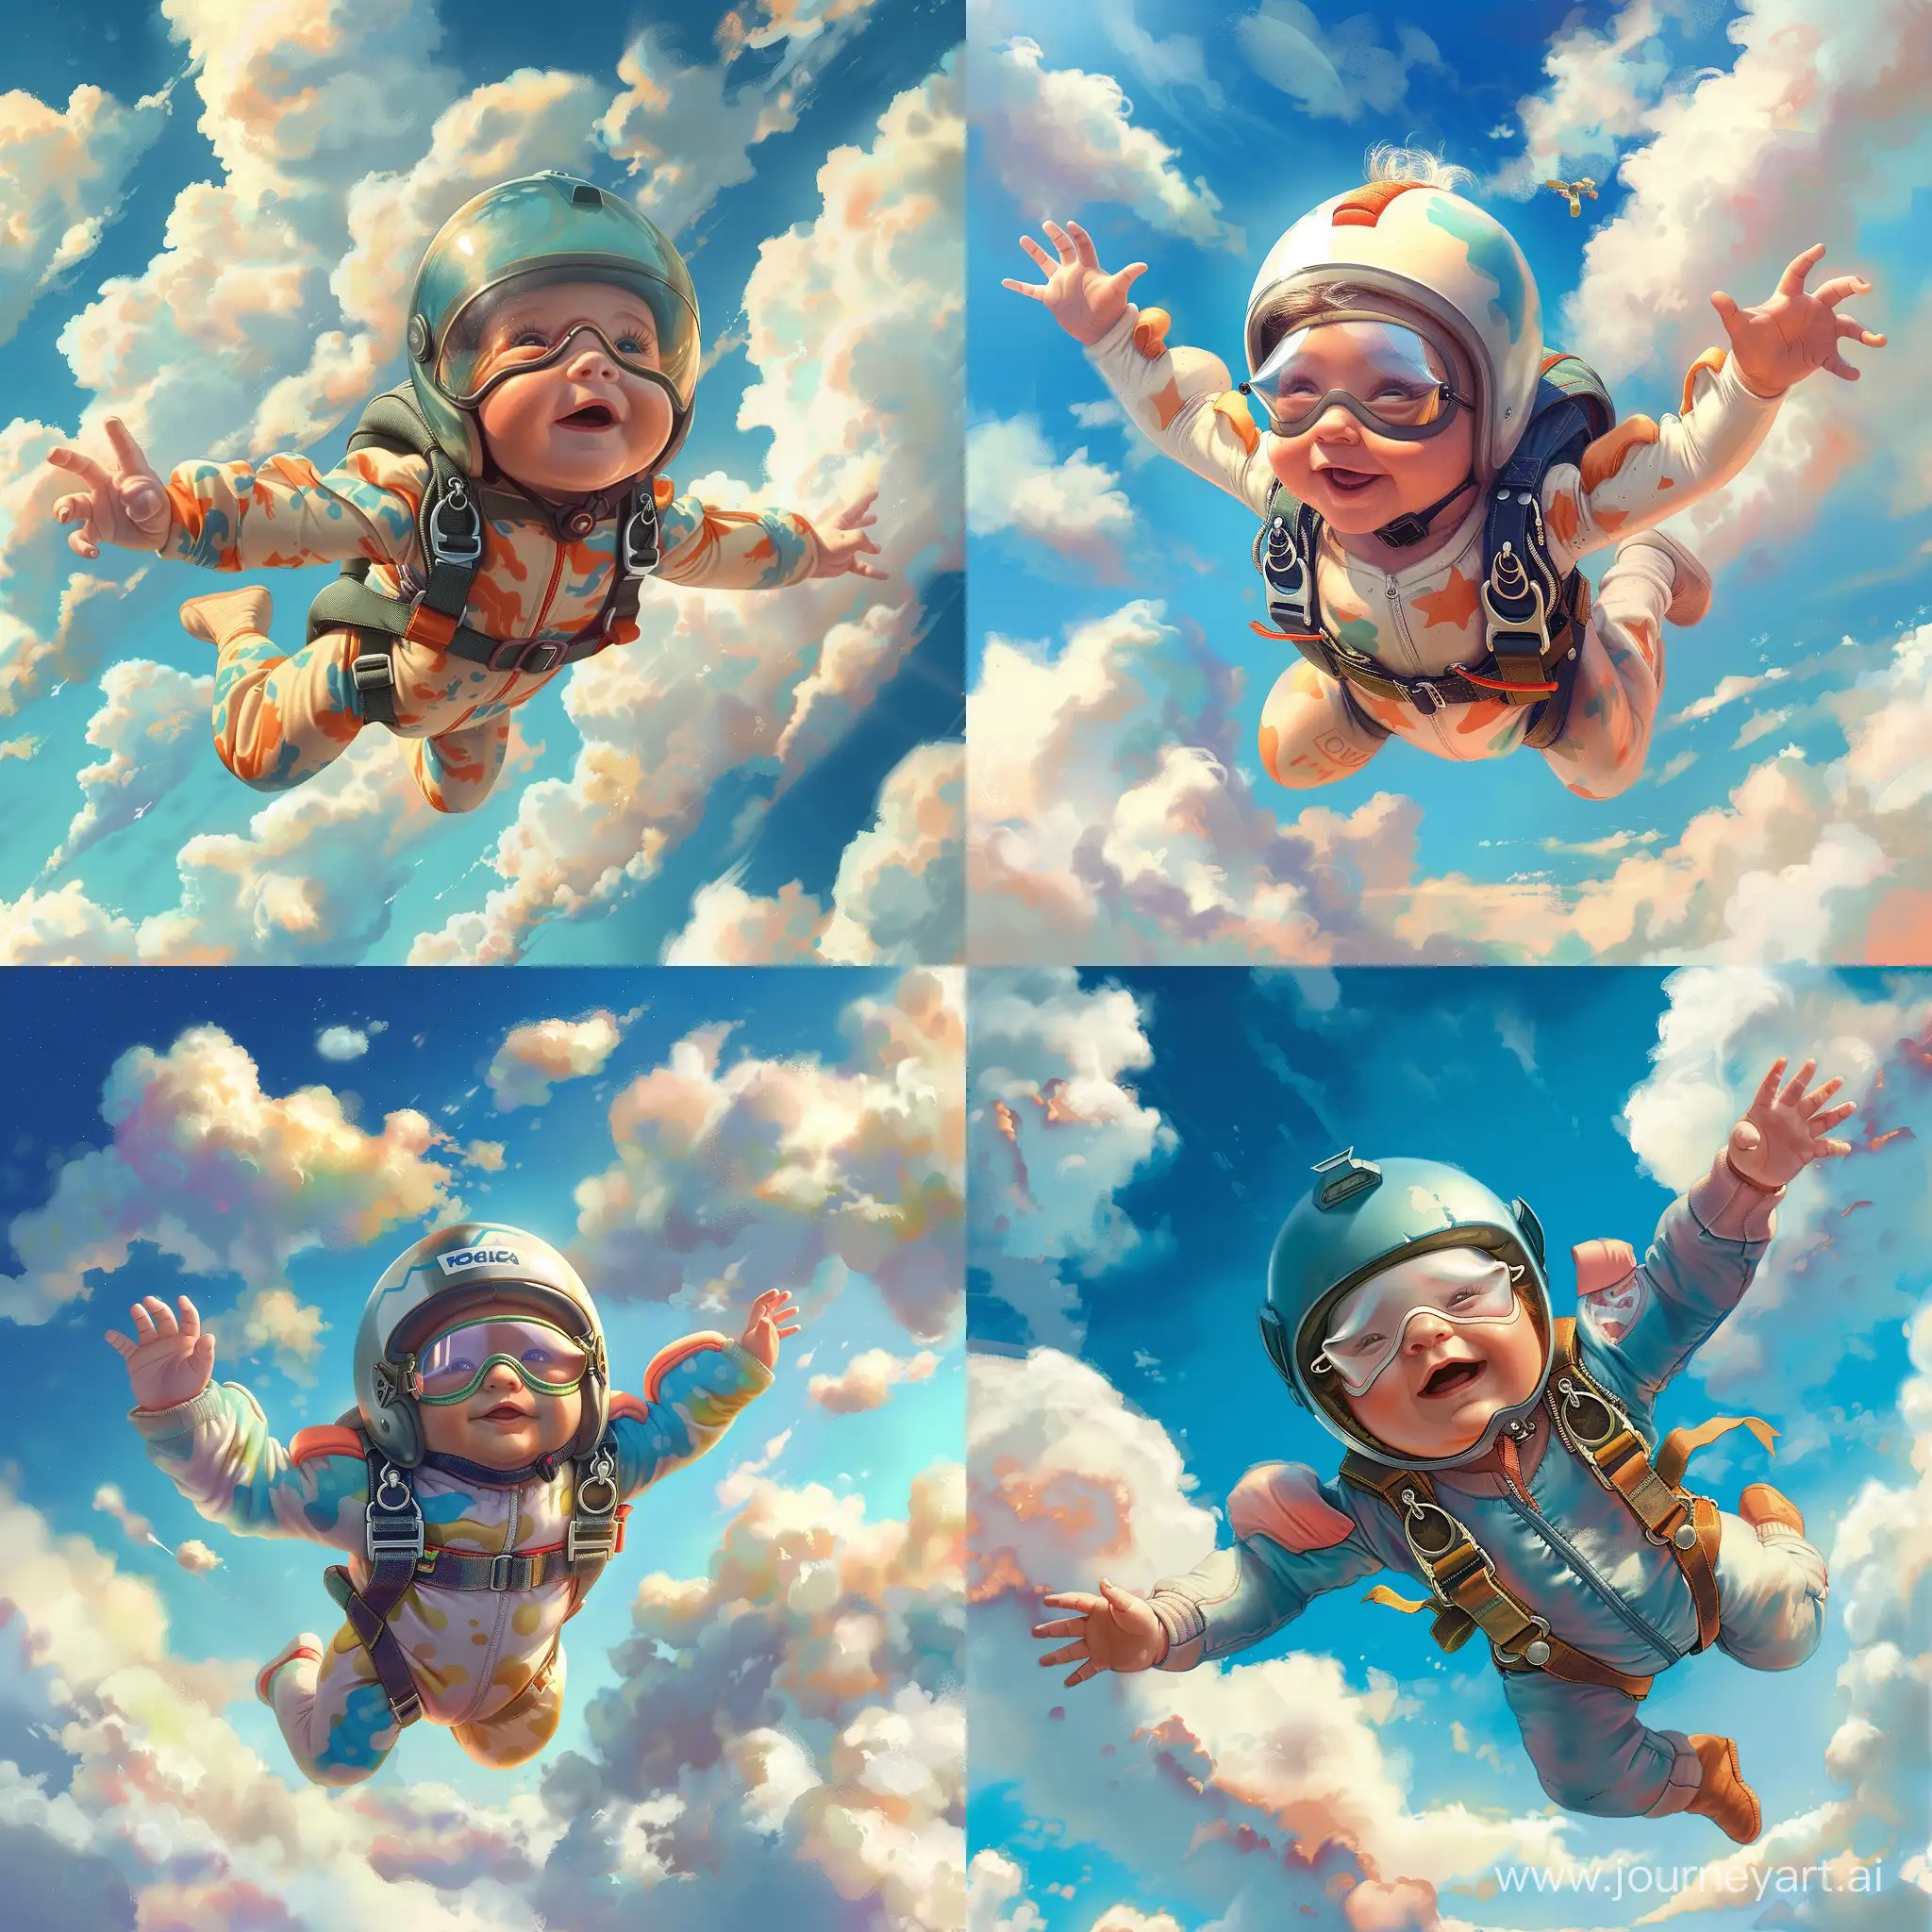 Joyful-Baby-Skydiving-Adventure-with-Fluffy-Clouds